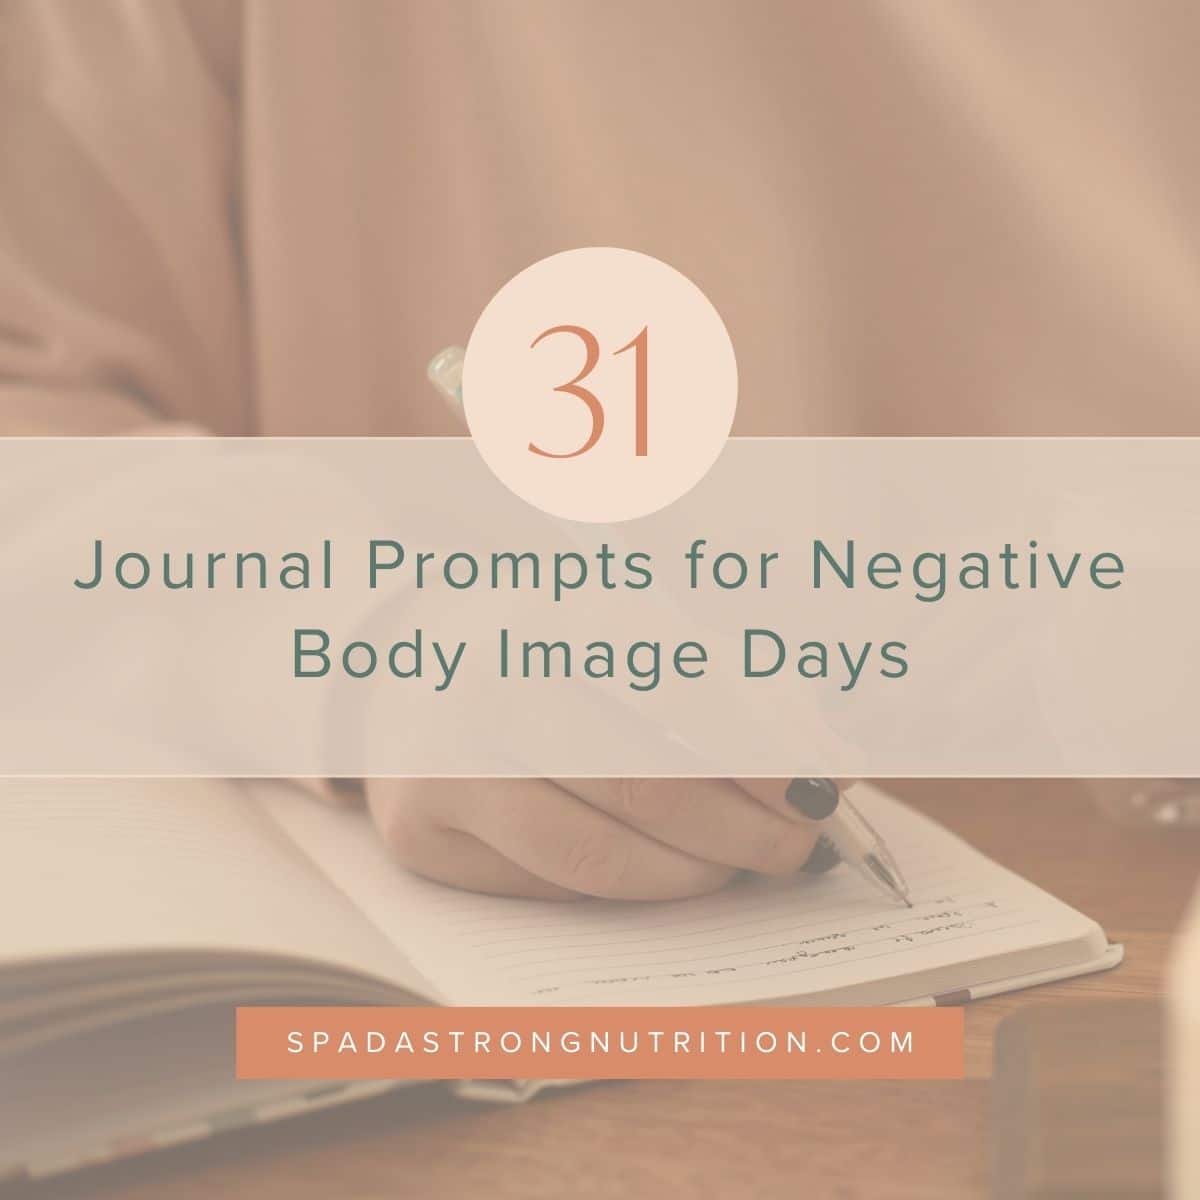 Woman journaling and text that says "31 journal prompts for negative body image days"